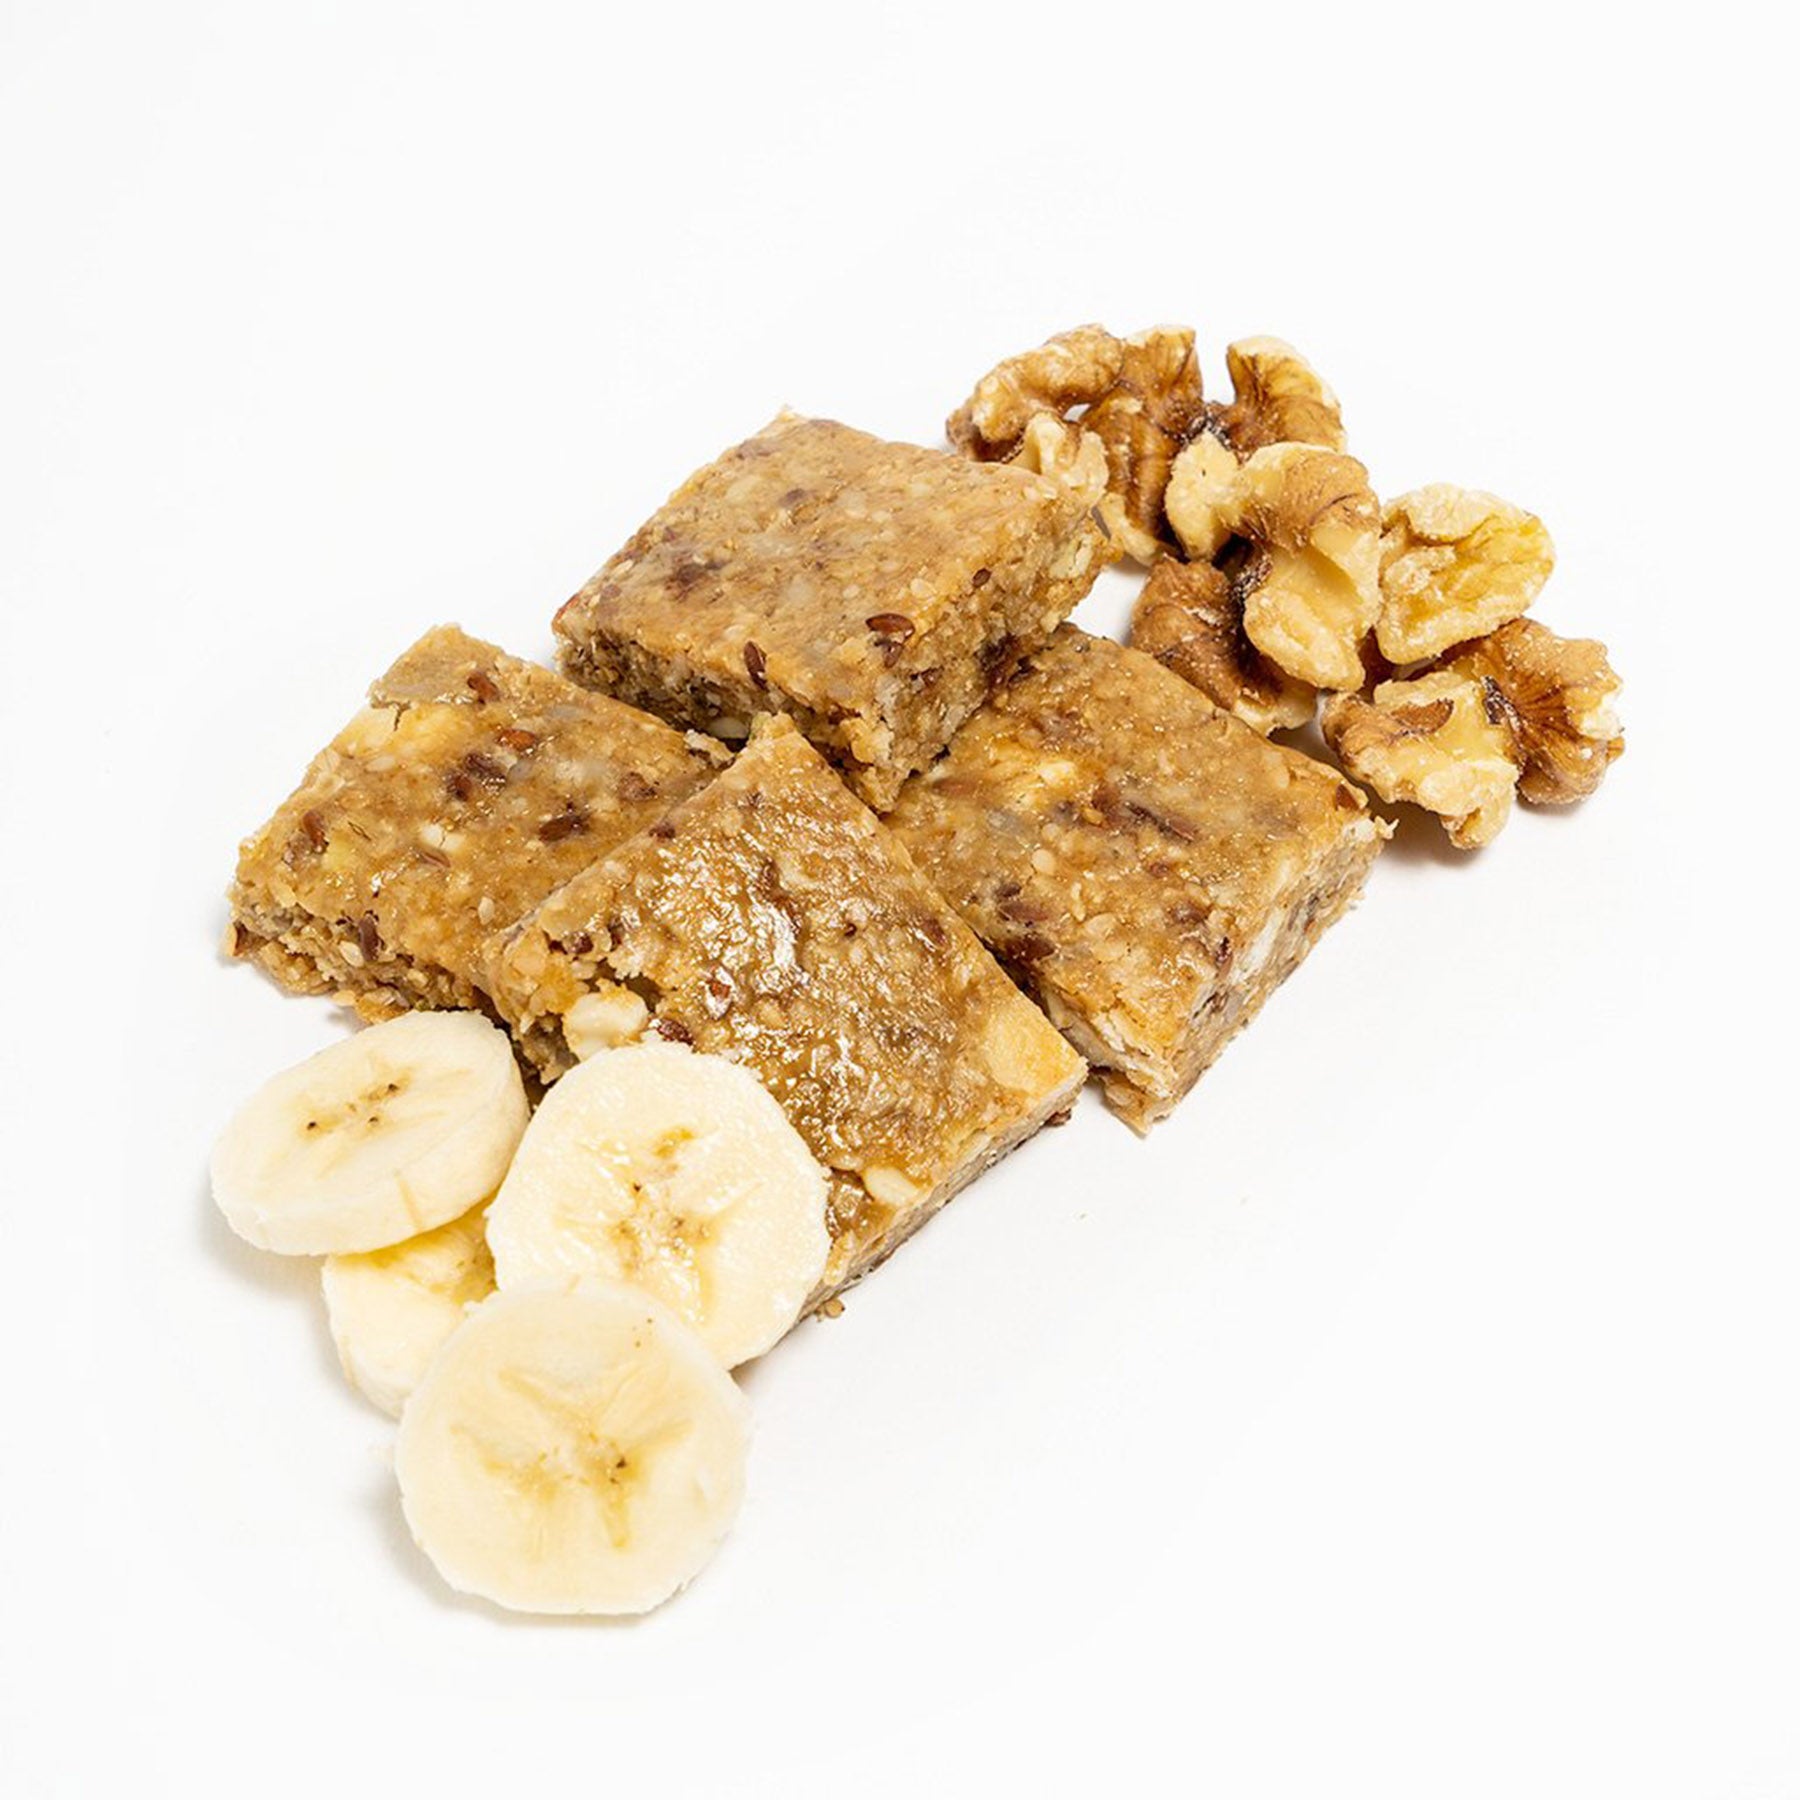 four square slices of the banana nut bread probar some bananas and nuts strewn about